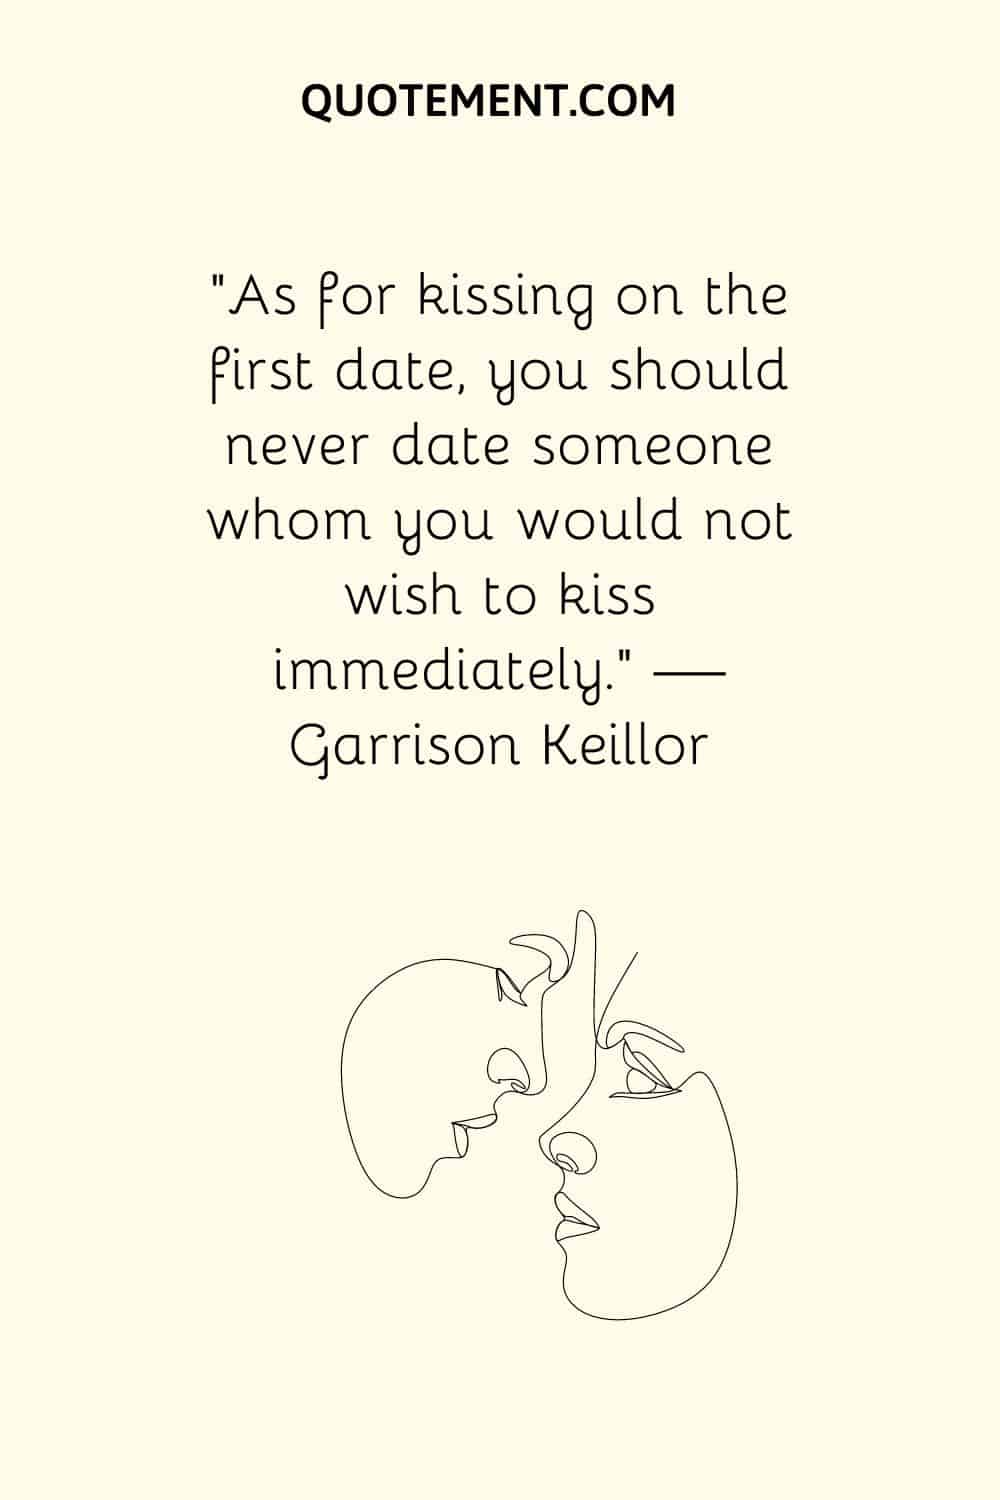 As for kissing on the first date, you should never date someone whom you would not wish to kiss immediately